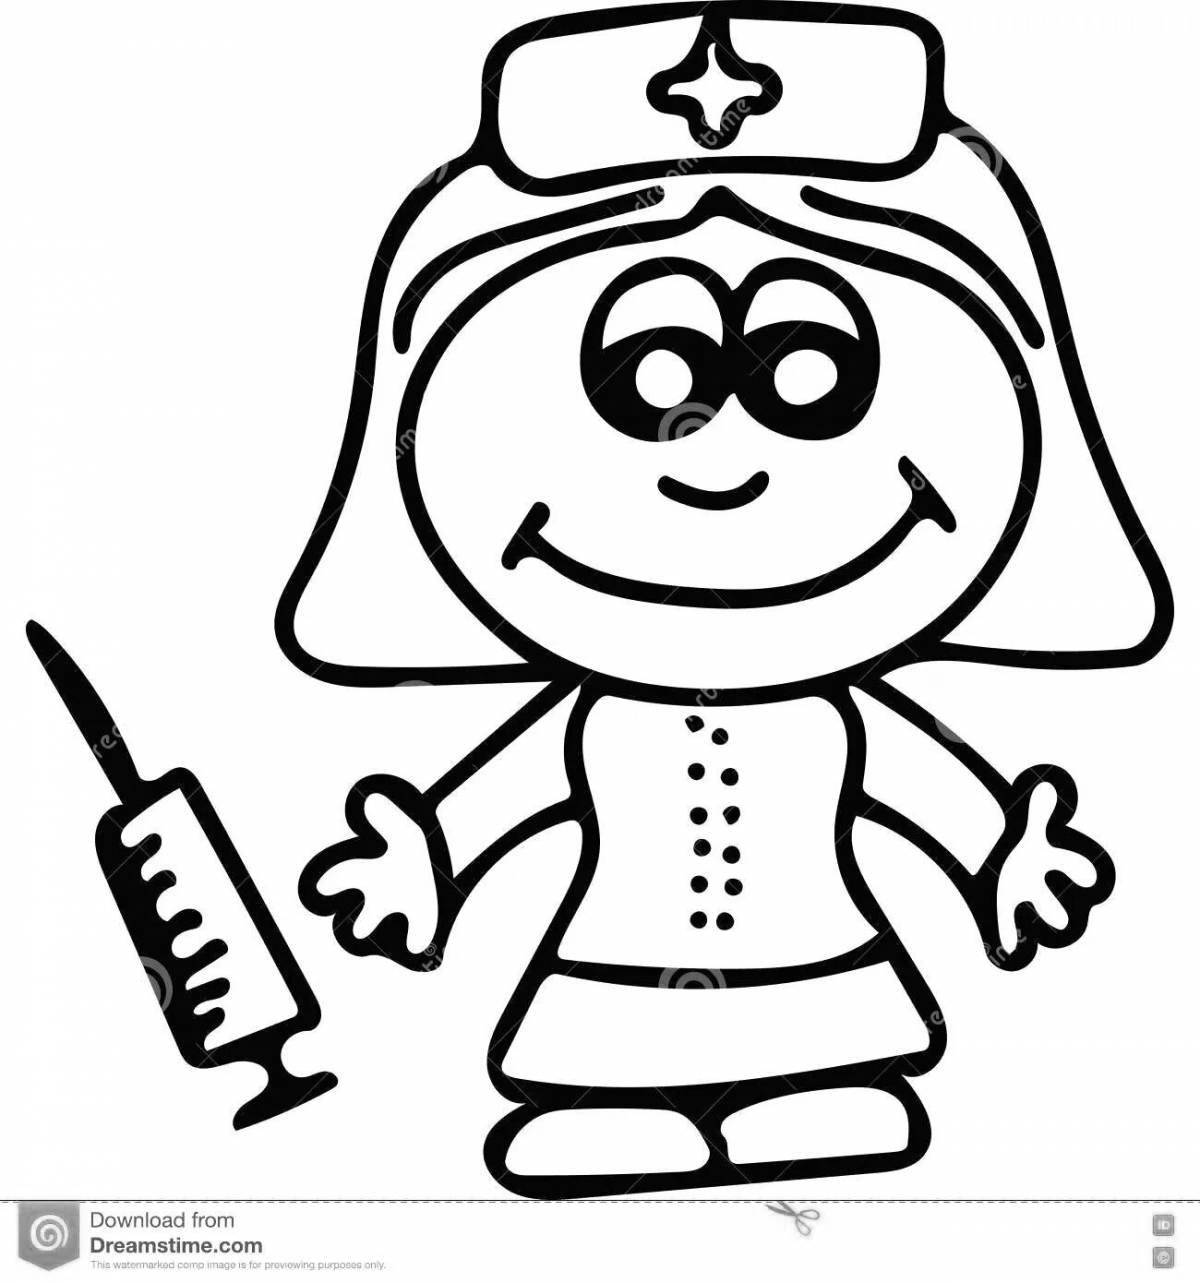 Adorable military nurse coloring book for kids